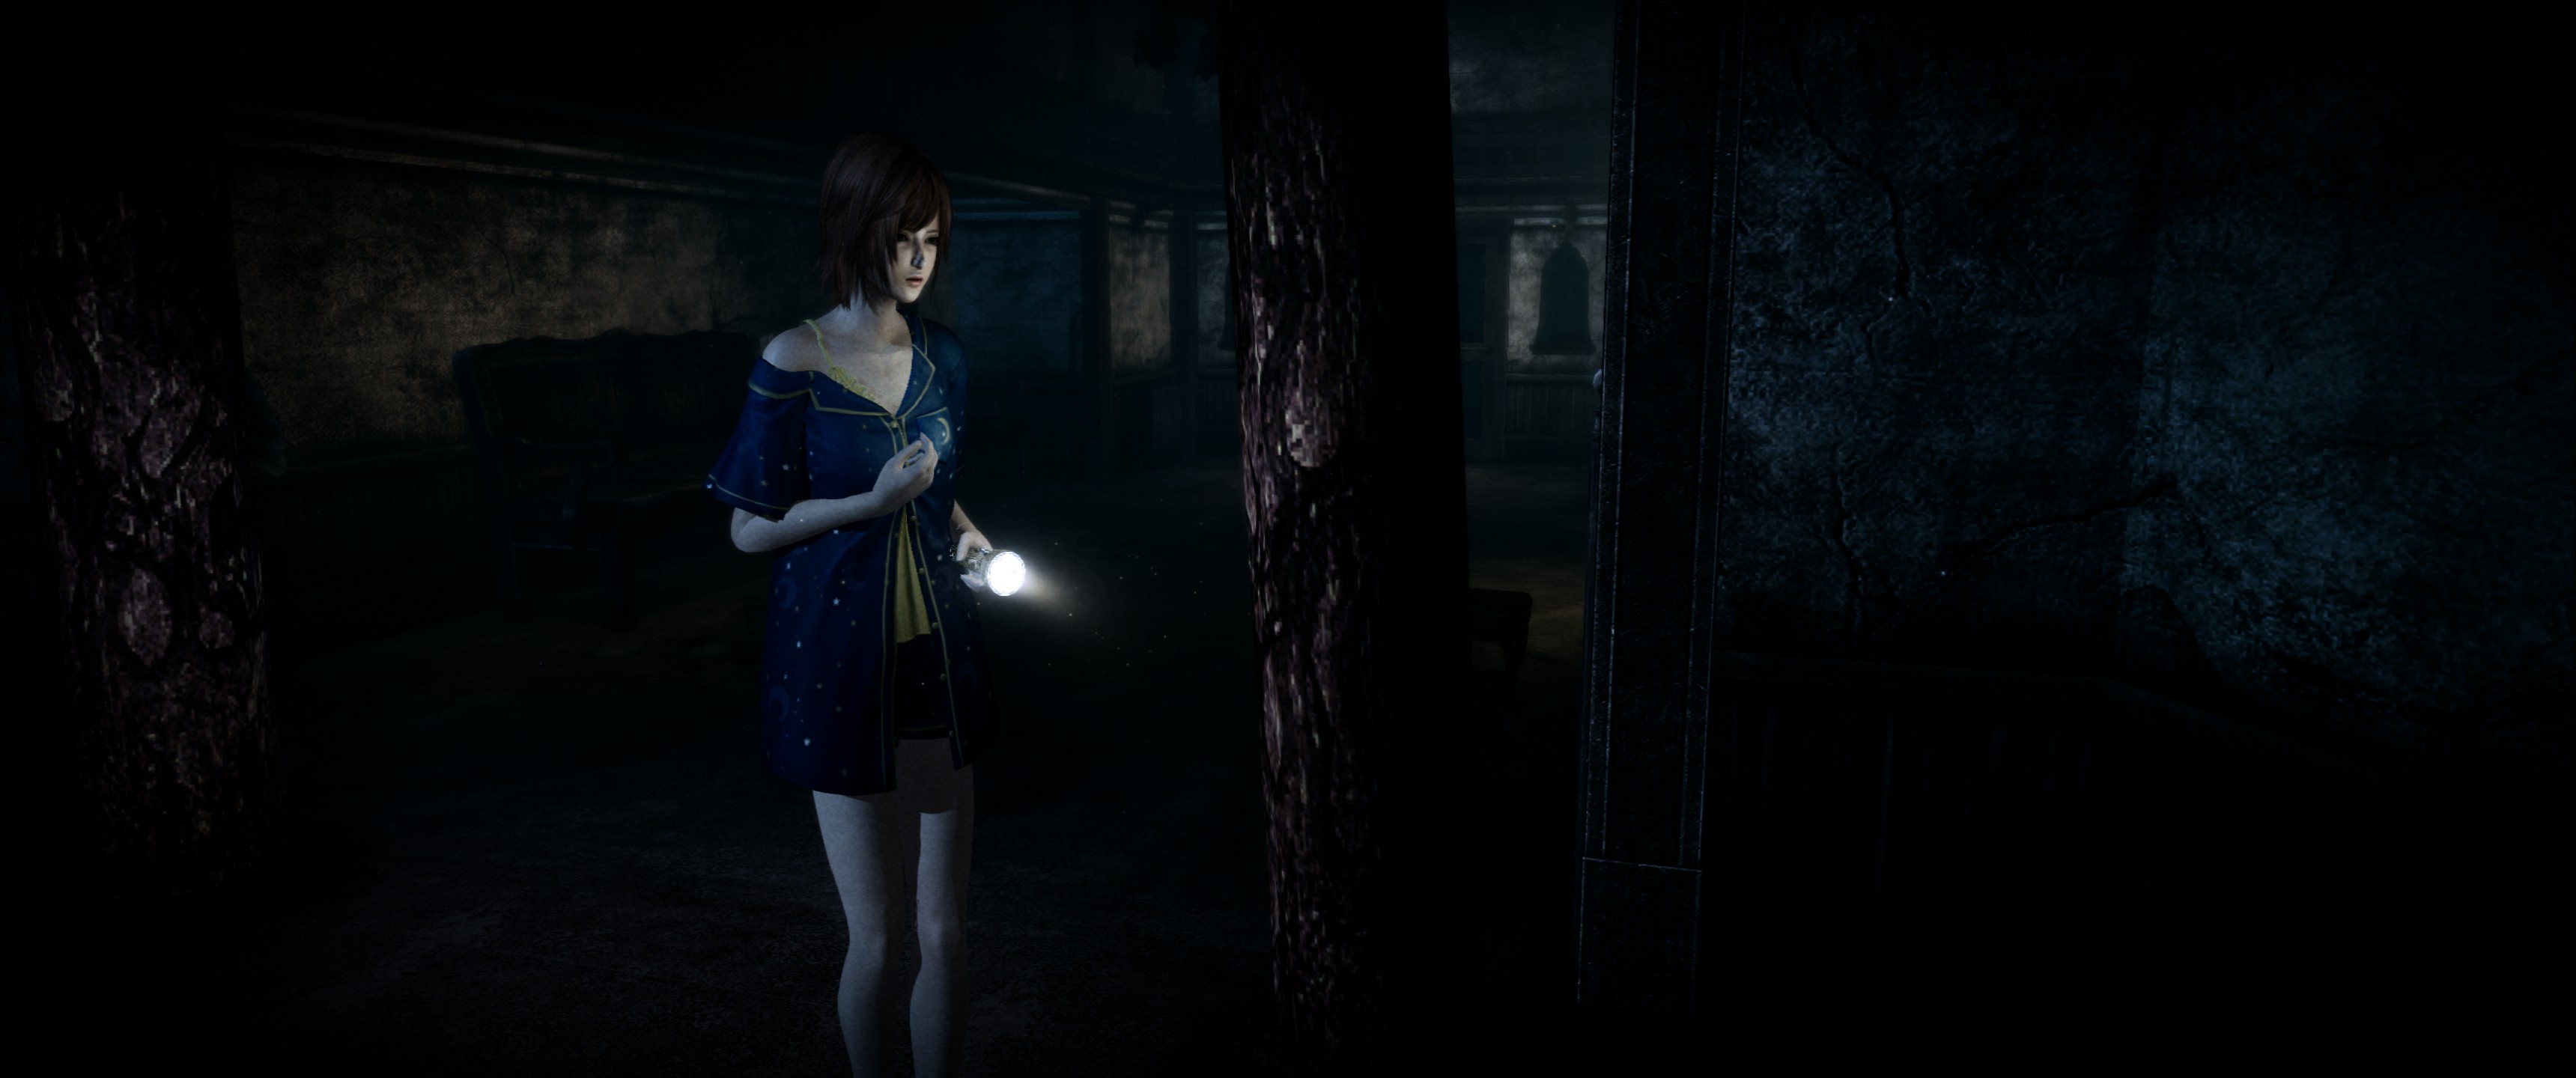 FATAL FRAME / PROJECT ZERO: Mask of the Lunar Eclipse - How to fix 21:9 resolution - ‎ ‎ - 8631F1A